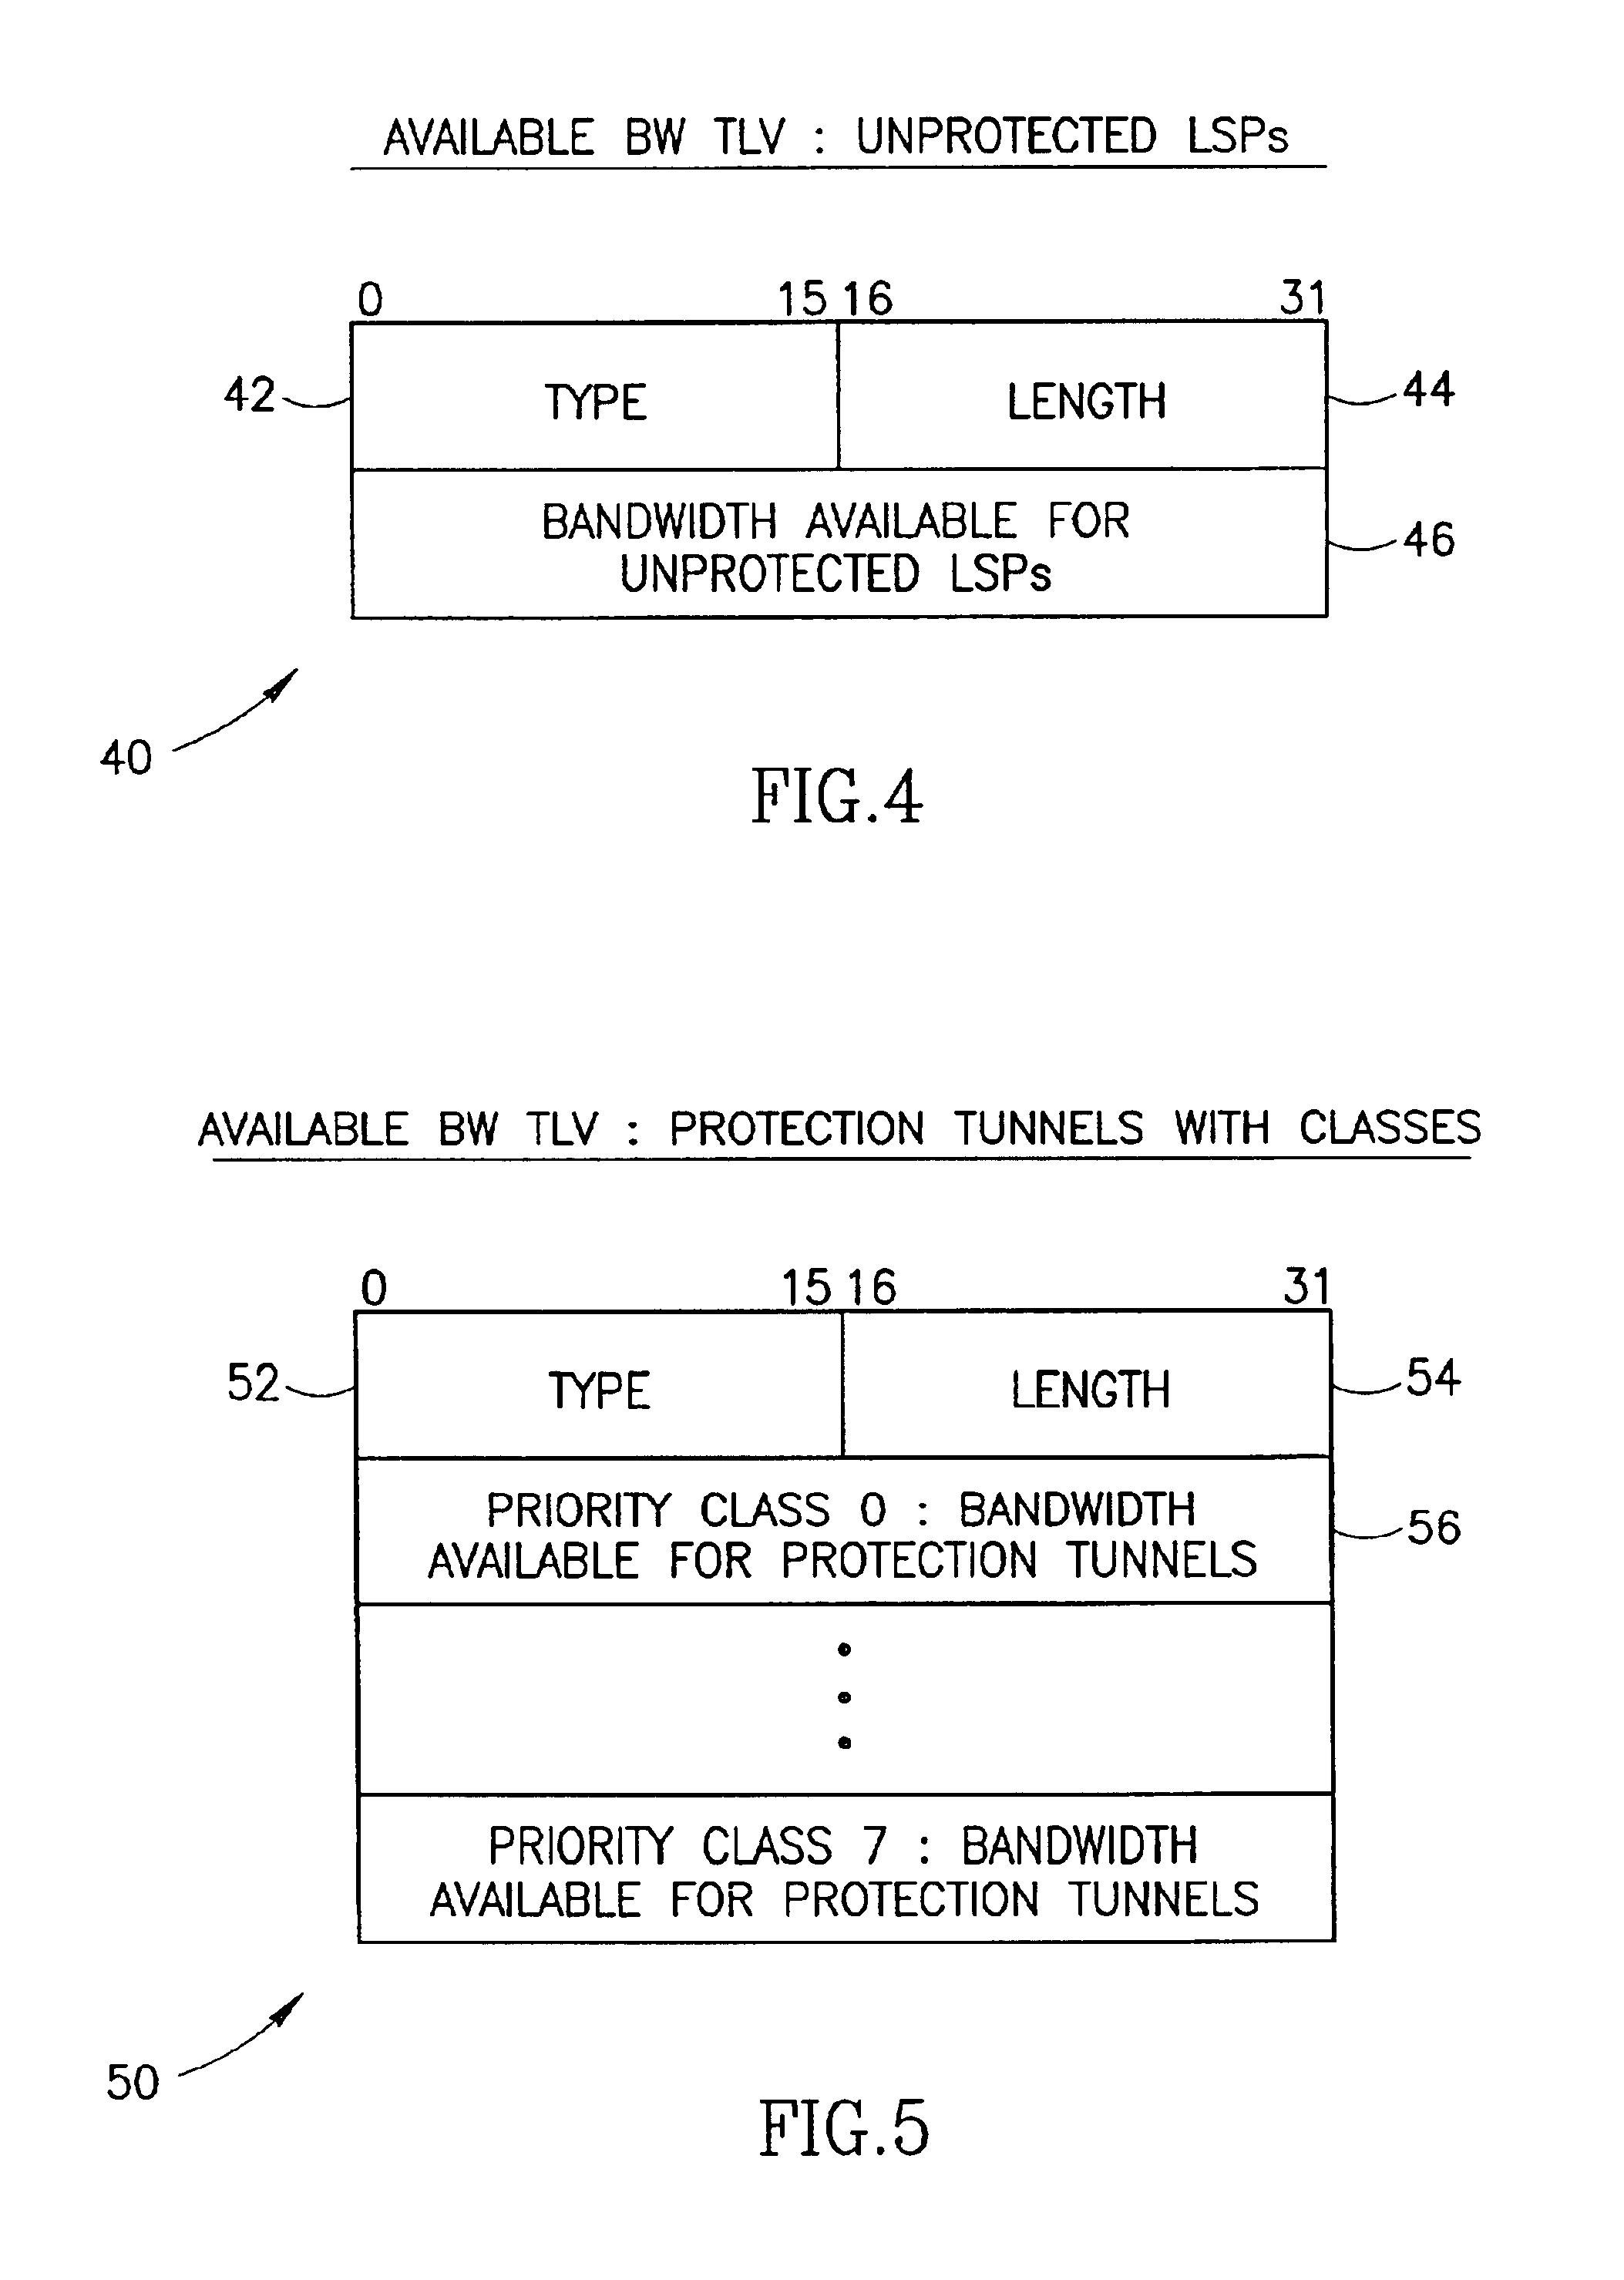 Path rerouting mechanism utilizing multiple link bandwidth allocations